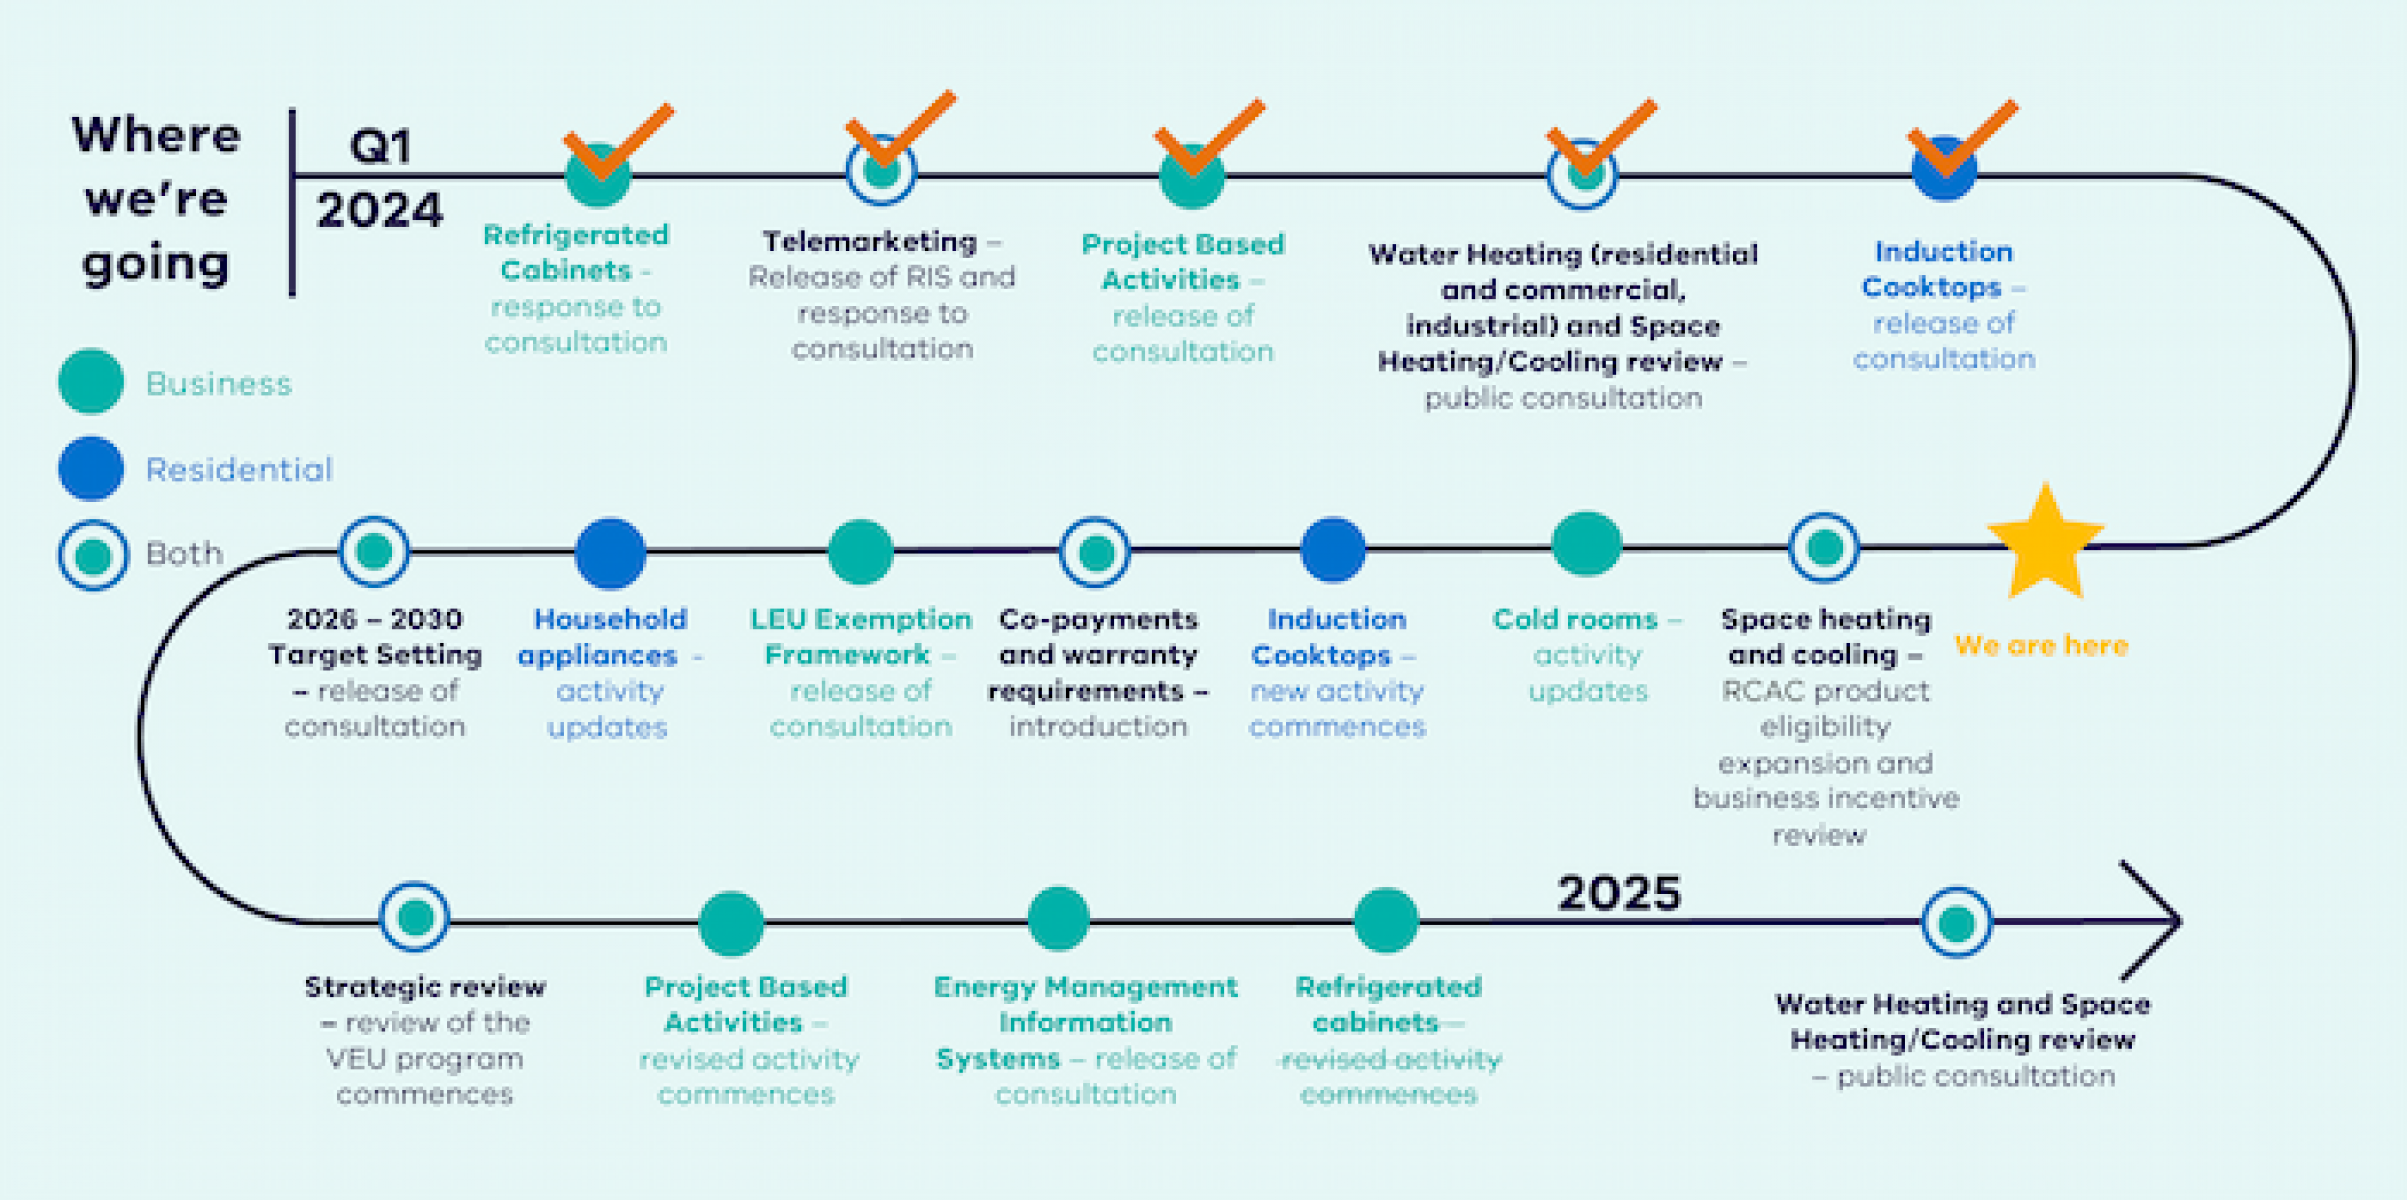 A timeline of VEU projects for 2024 and 2025, as outlined above